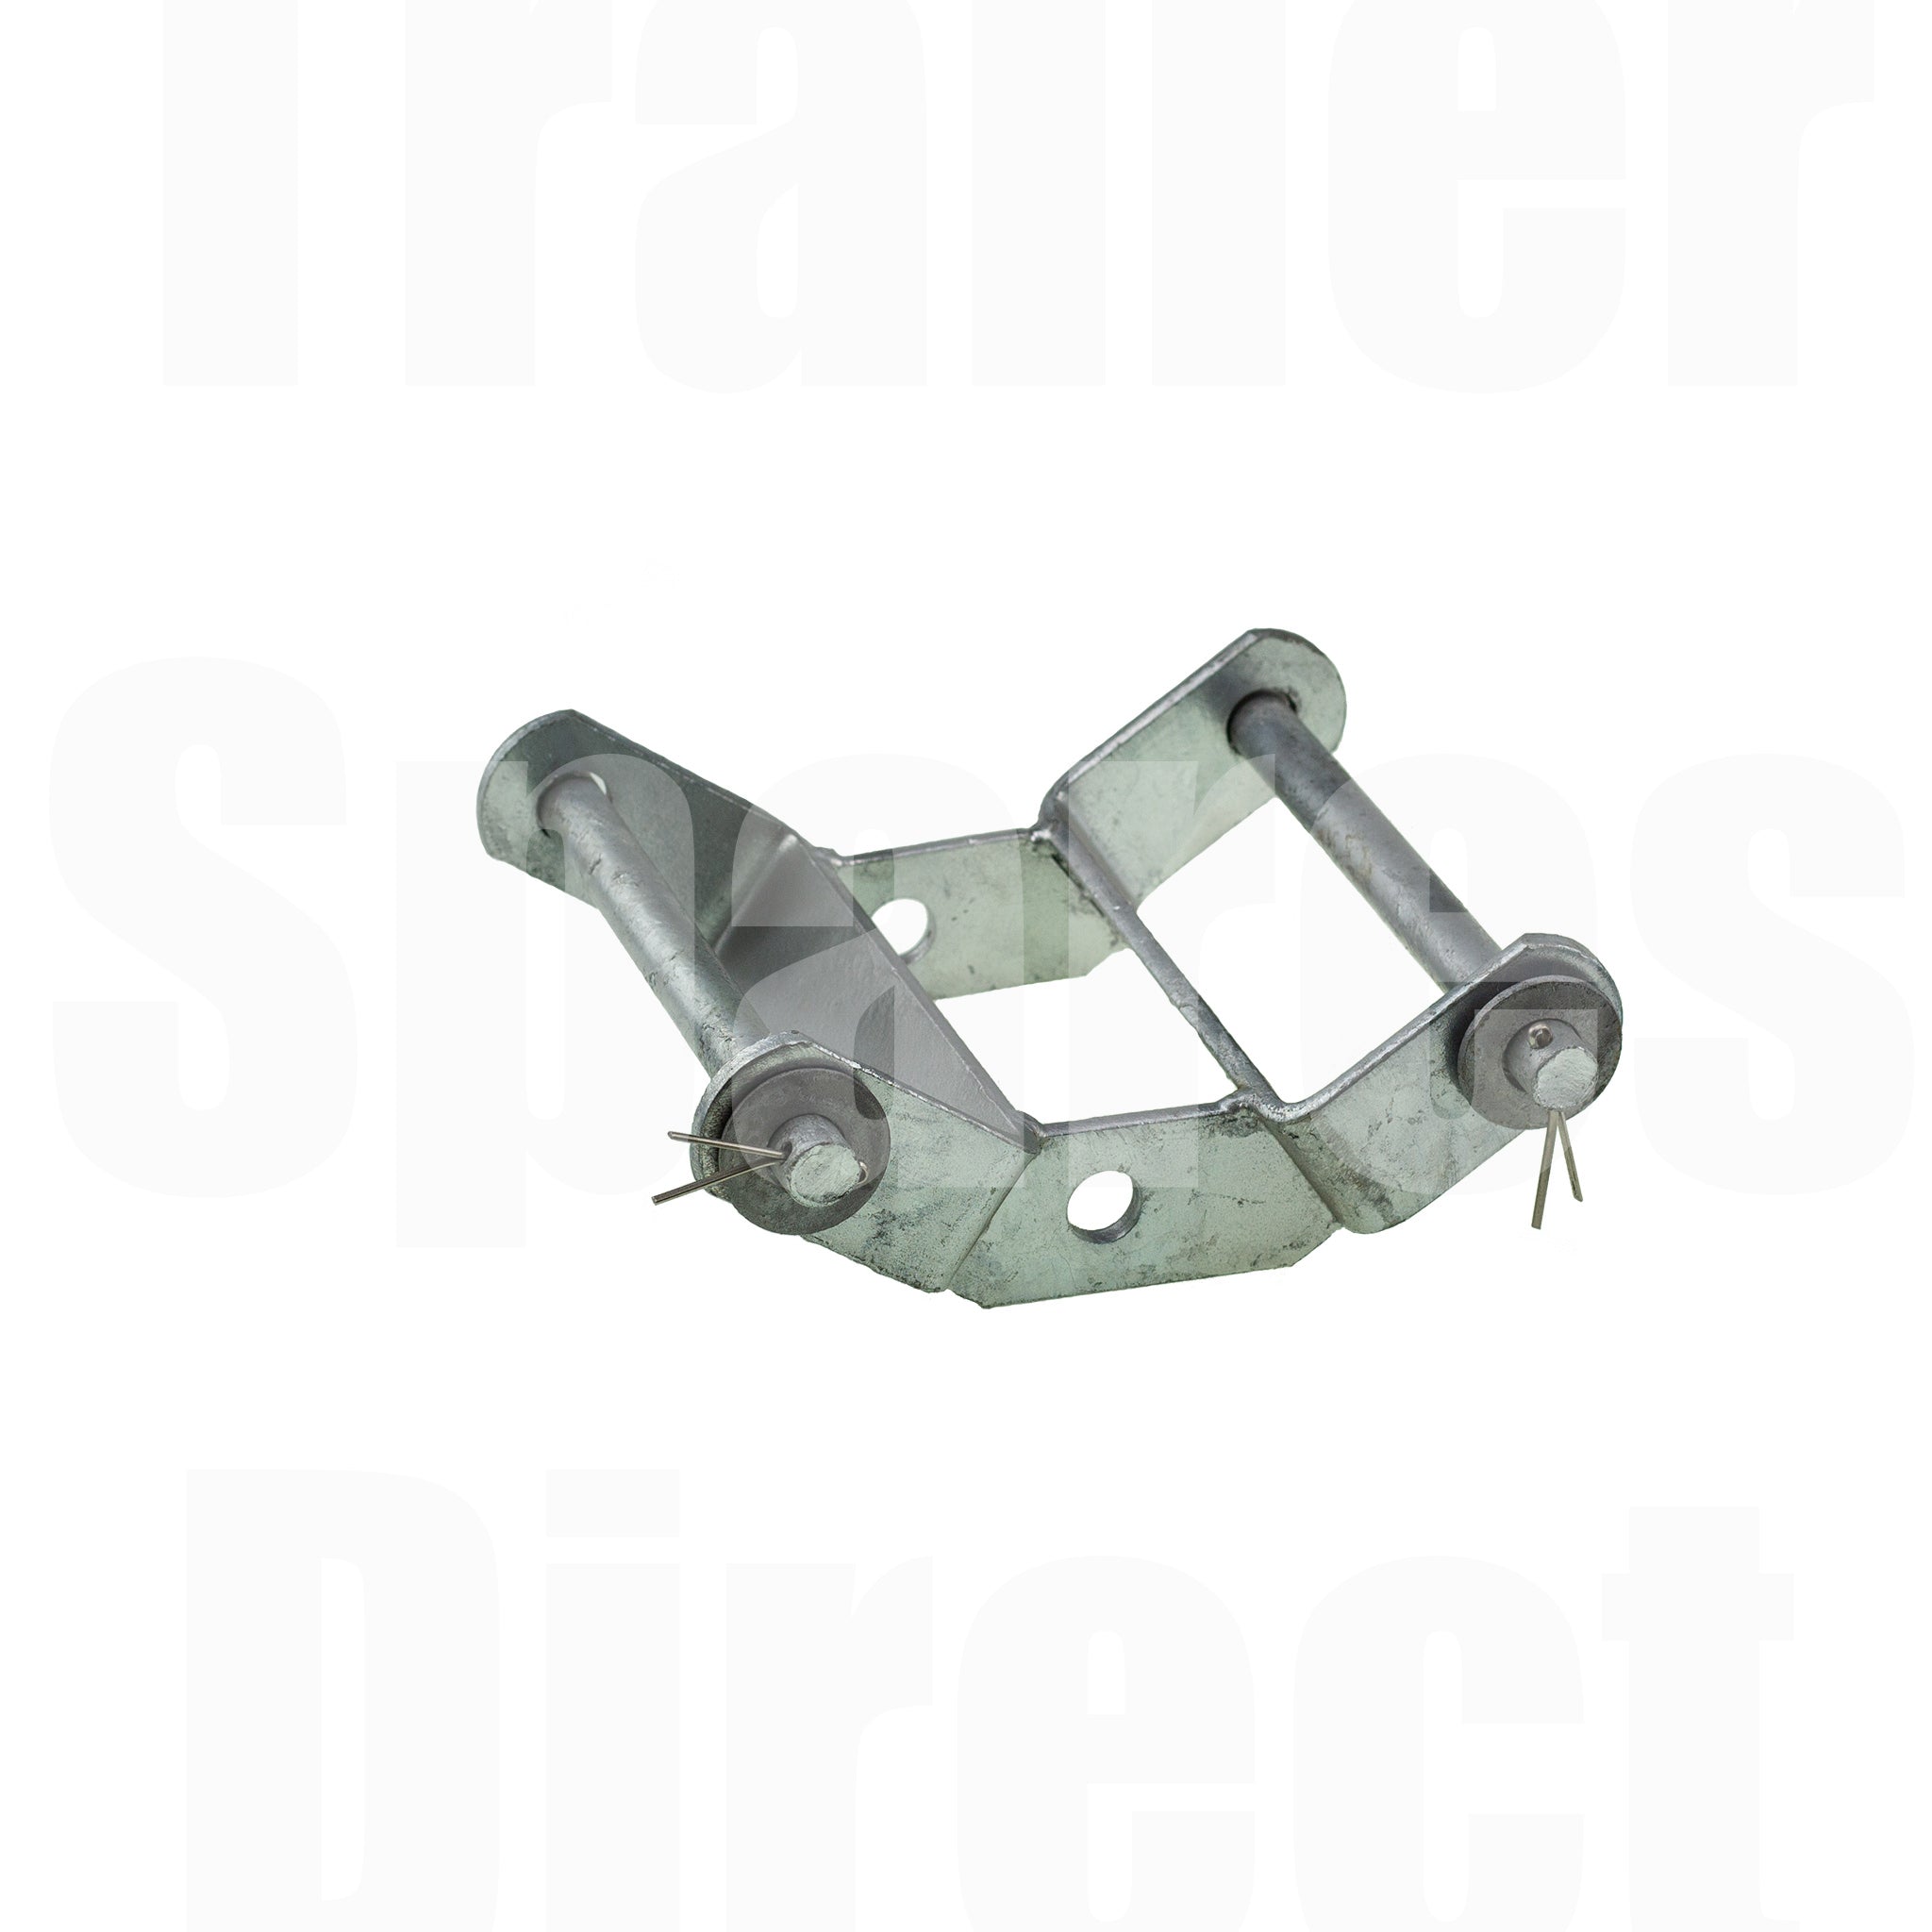 Double Roller Bracket 6 inch Galvanised includes Spindles